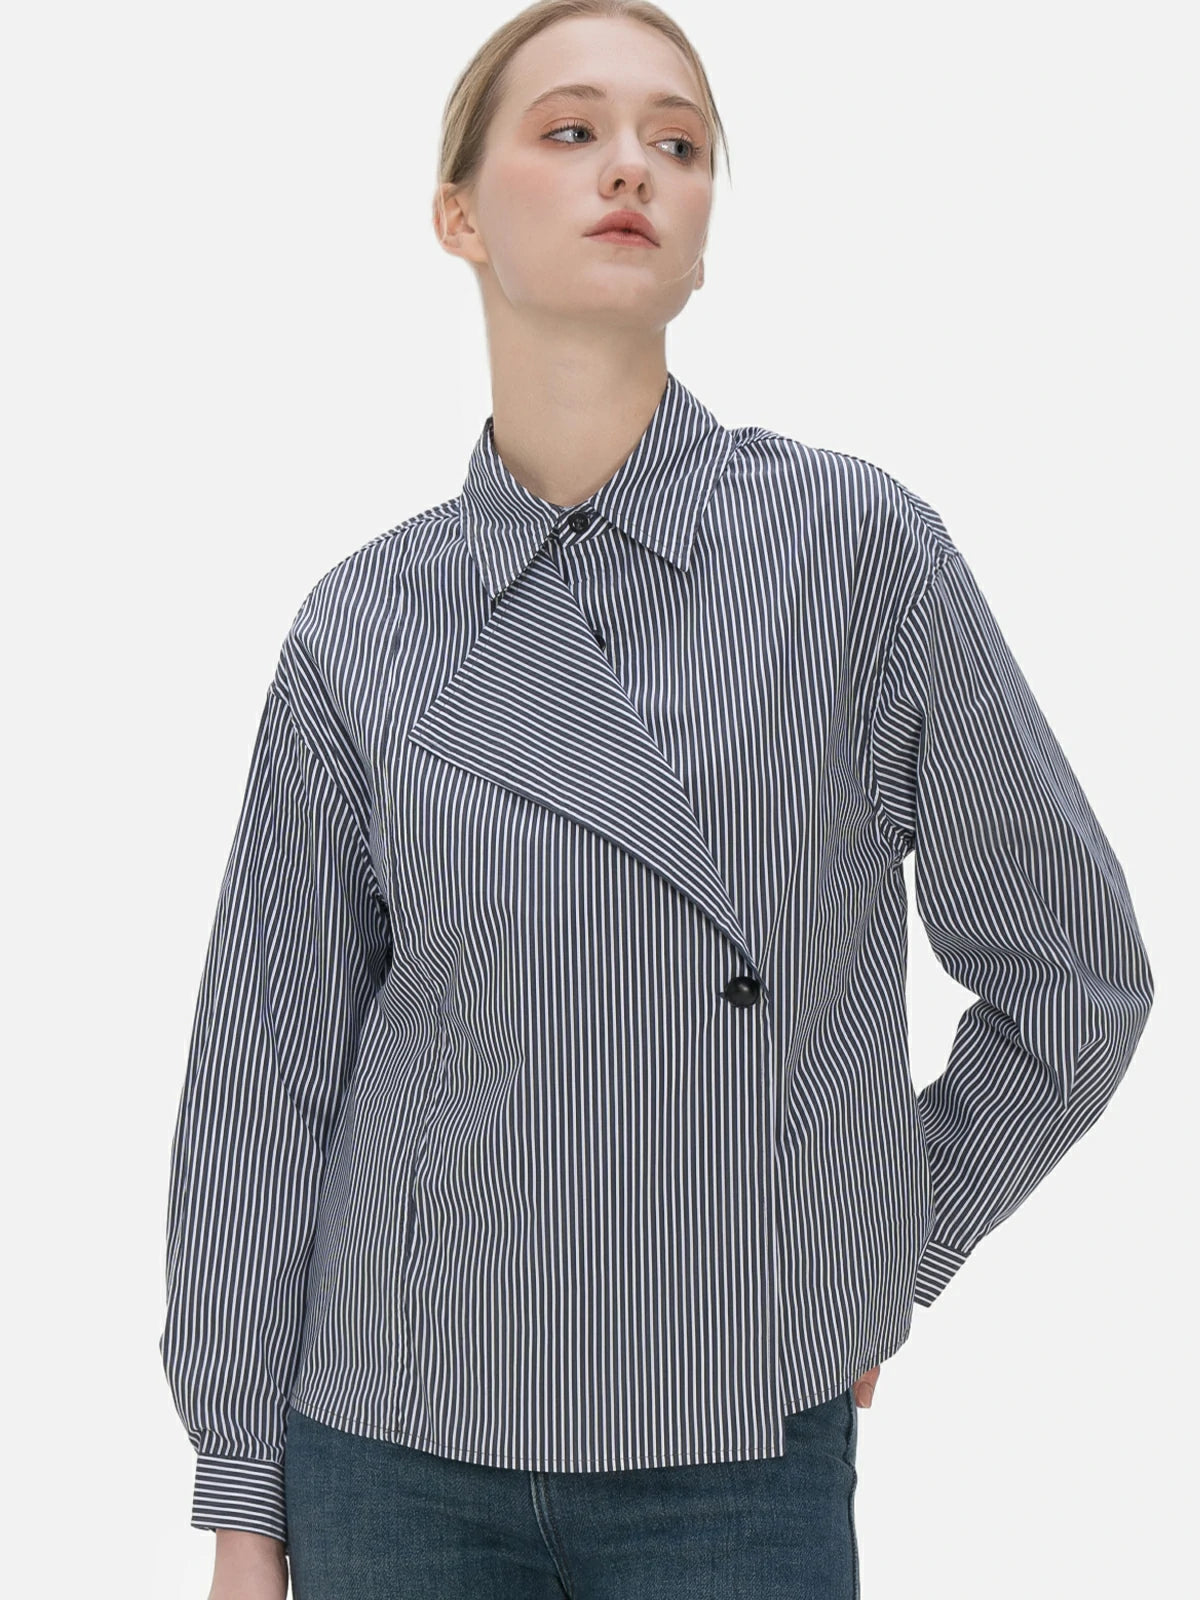 Classic blue and white striped shirt with unique chest splice